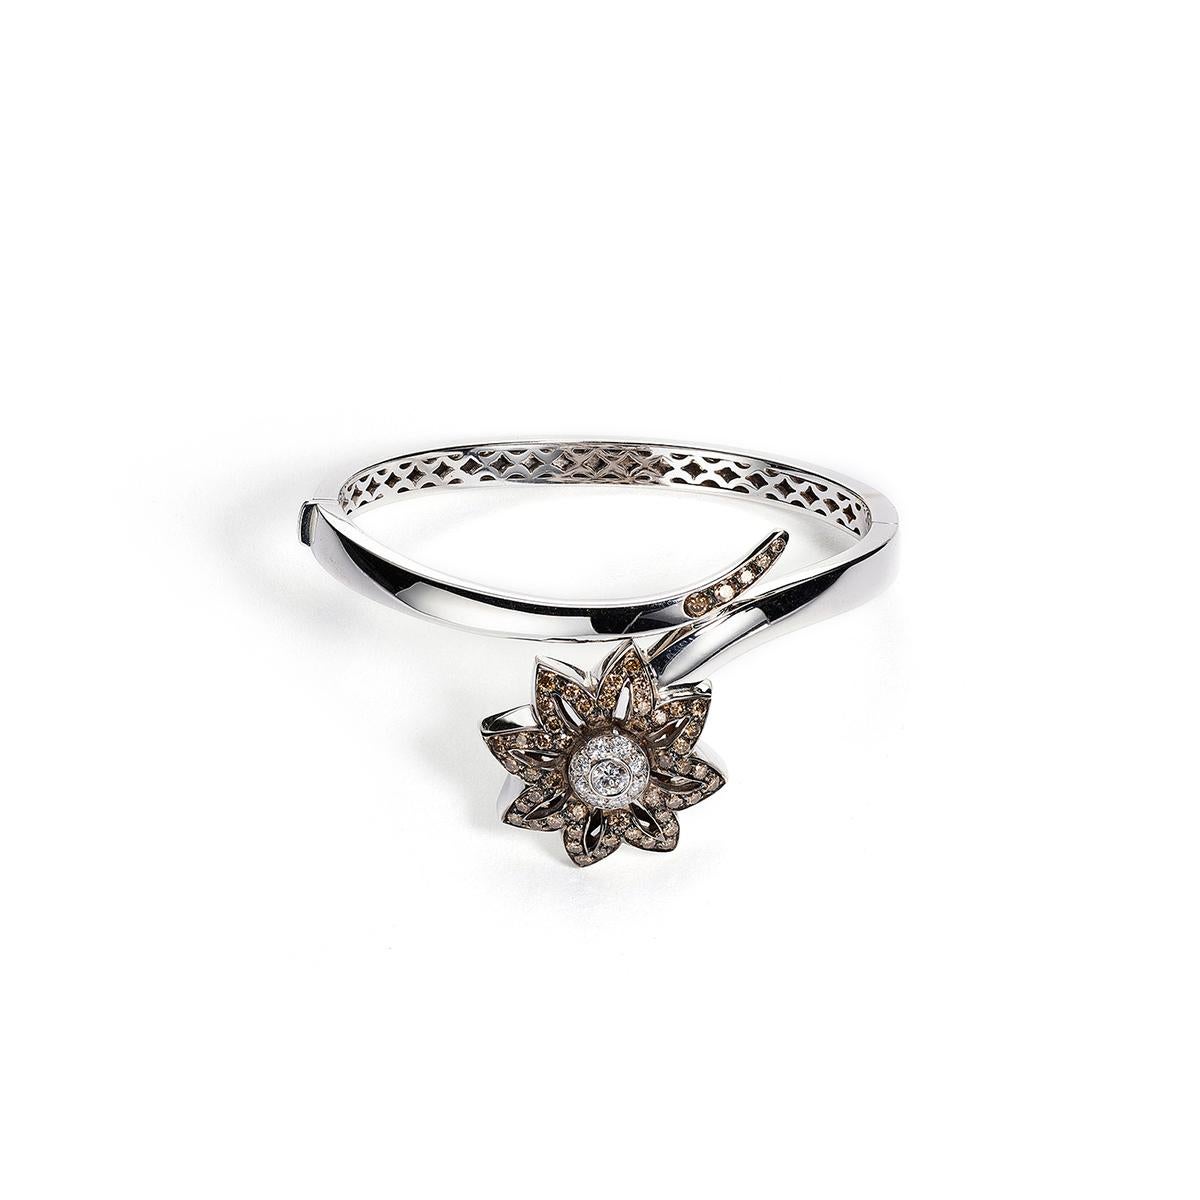 Flower bangle in 18kt white gold set with 9 diamonds 0.54 cts and 53 brown diamonds 1.47 cts